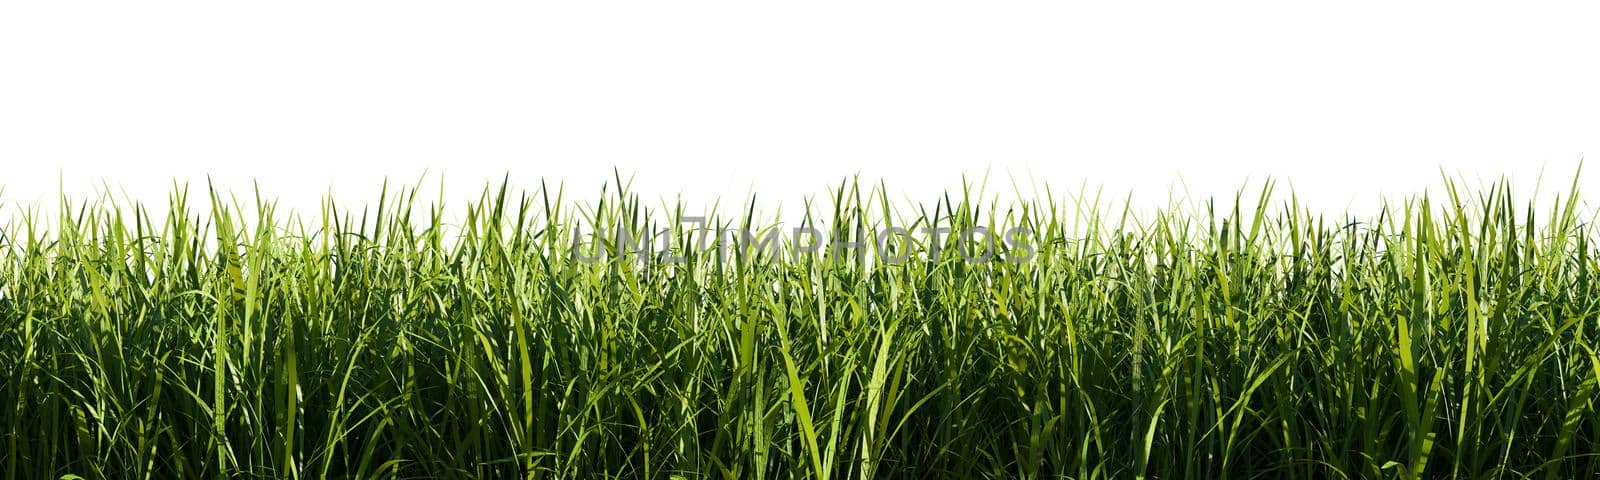 Bright green grass border isolated on white background, 3d rendering illustration.